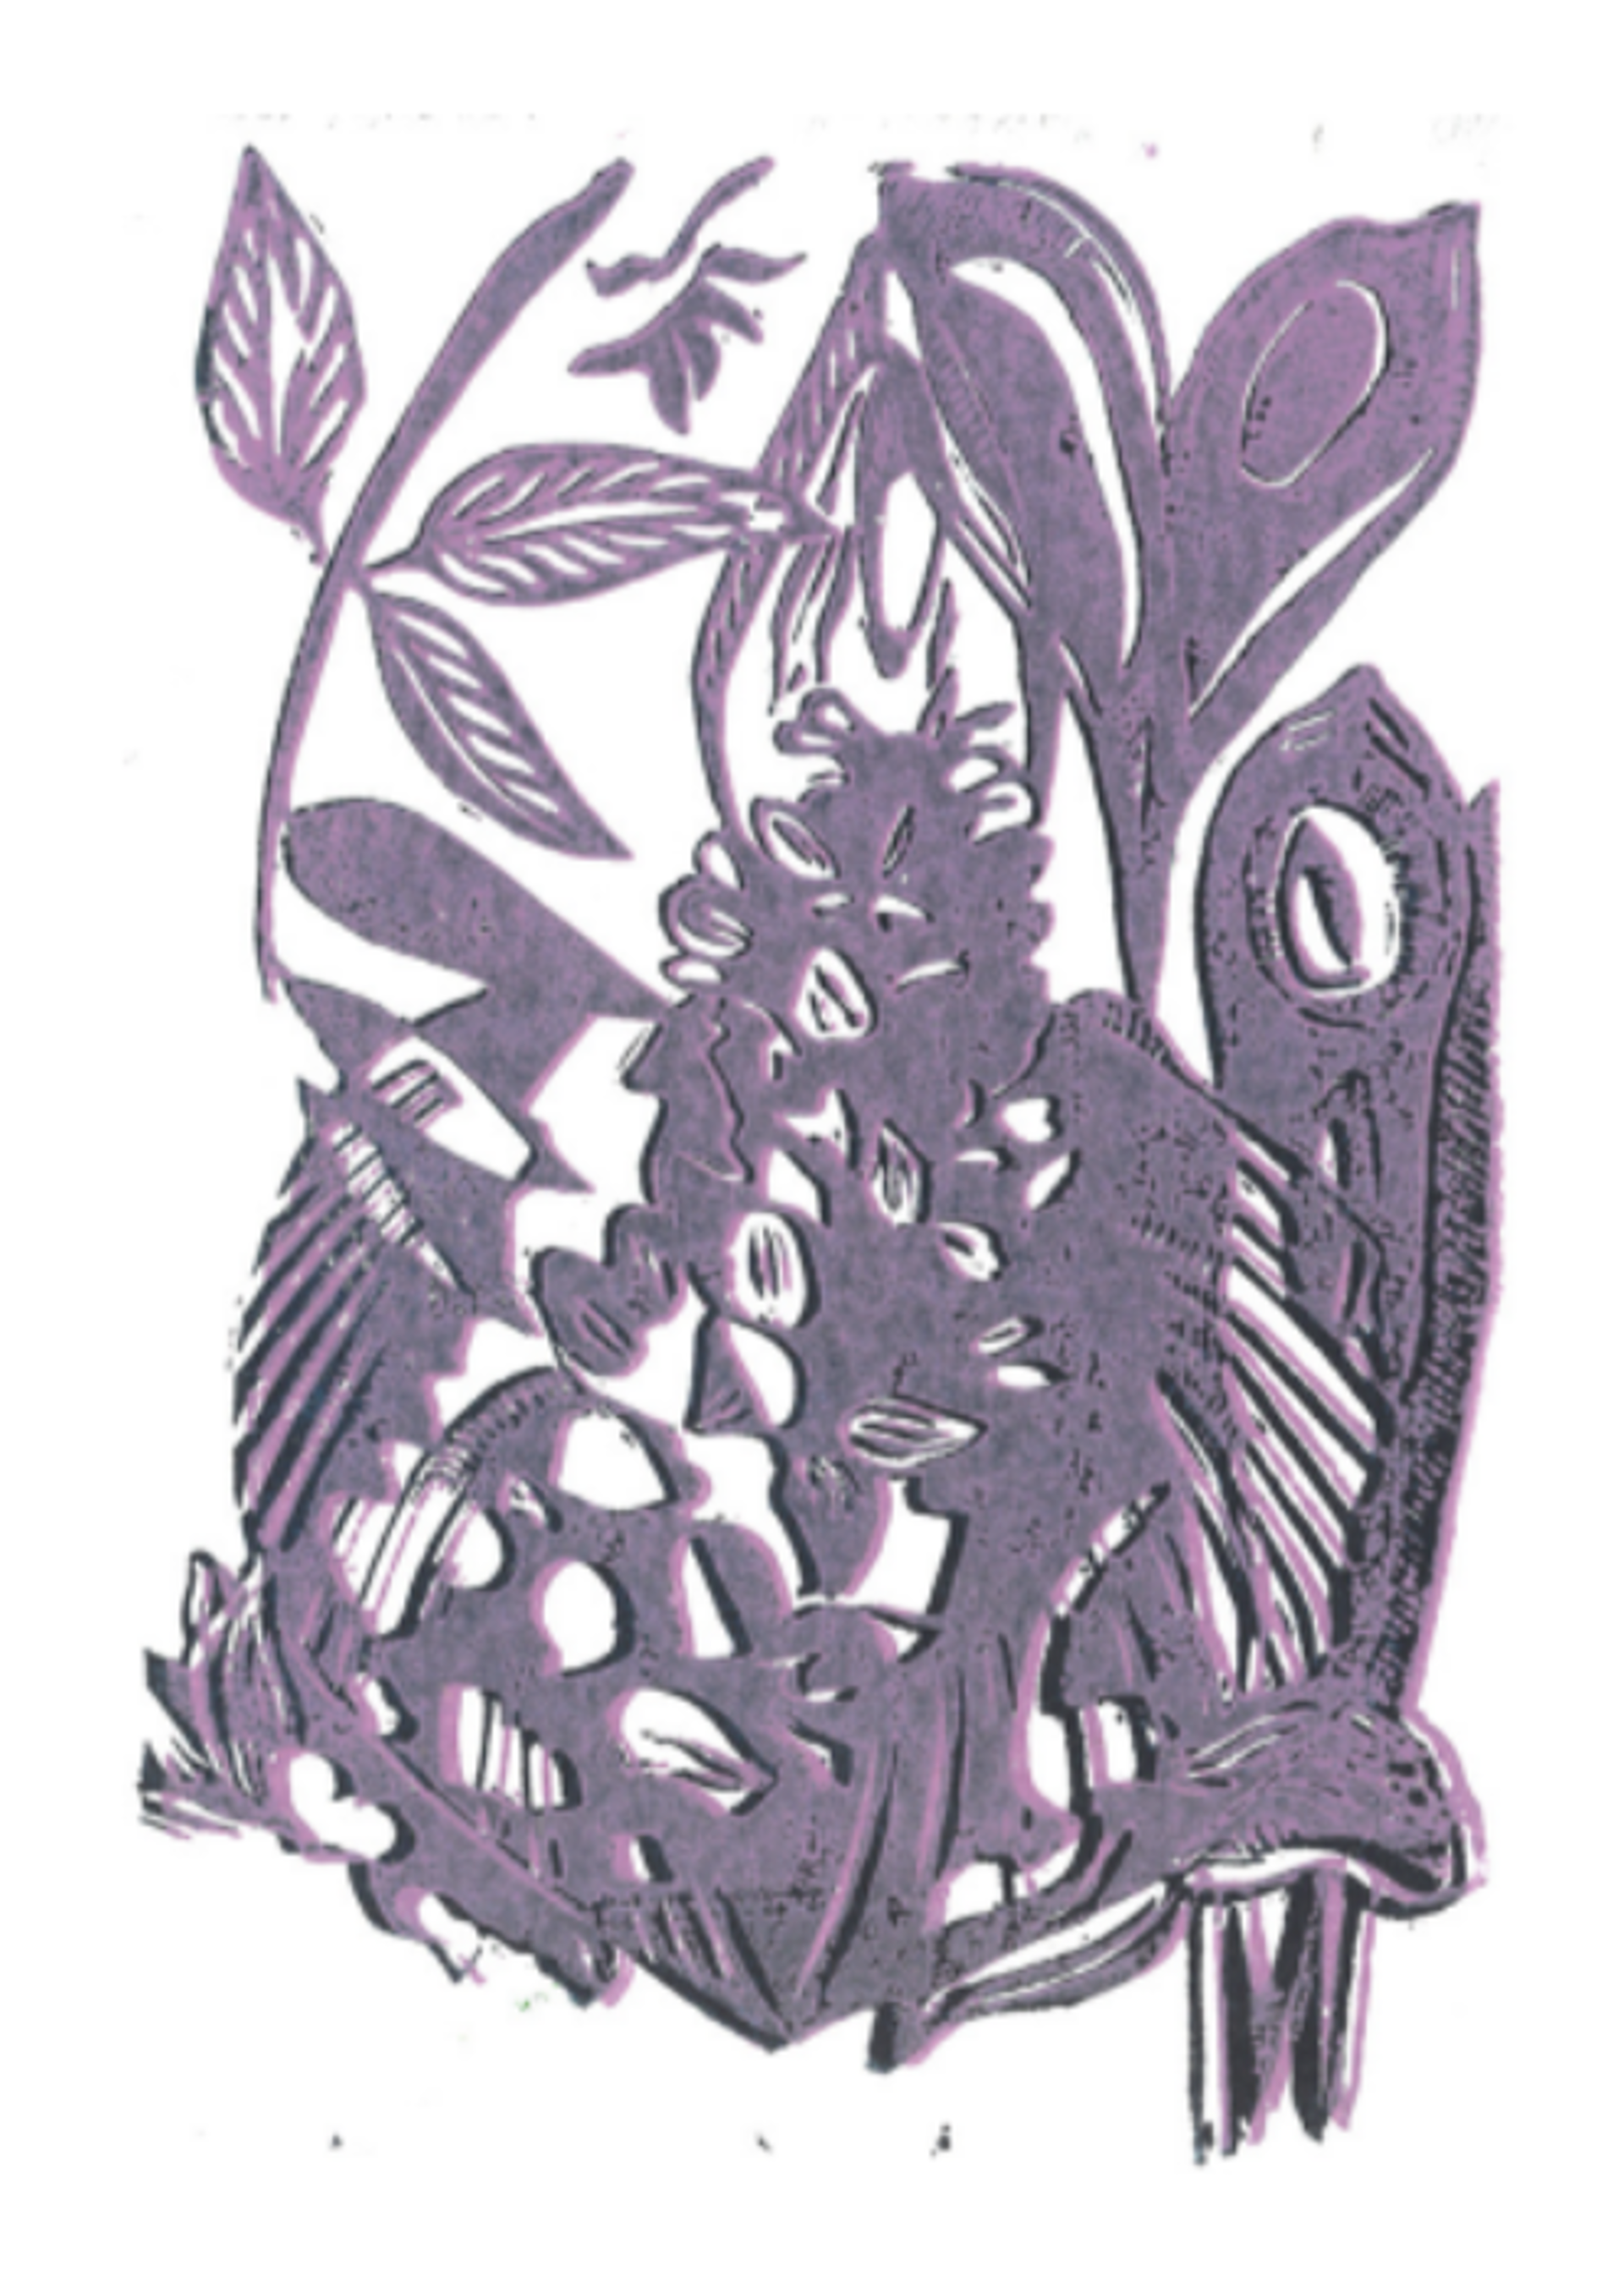 Wisteria - Printmaking Collaboration by Artists For Humanity